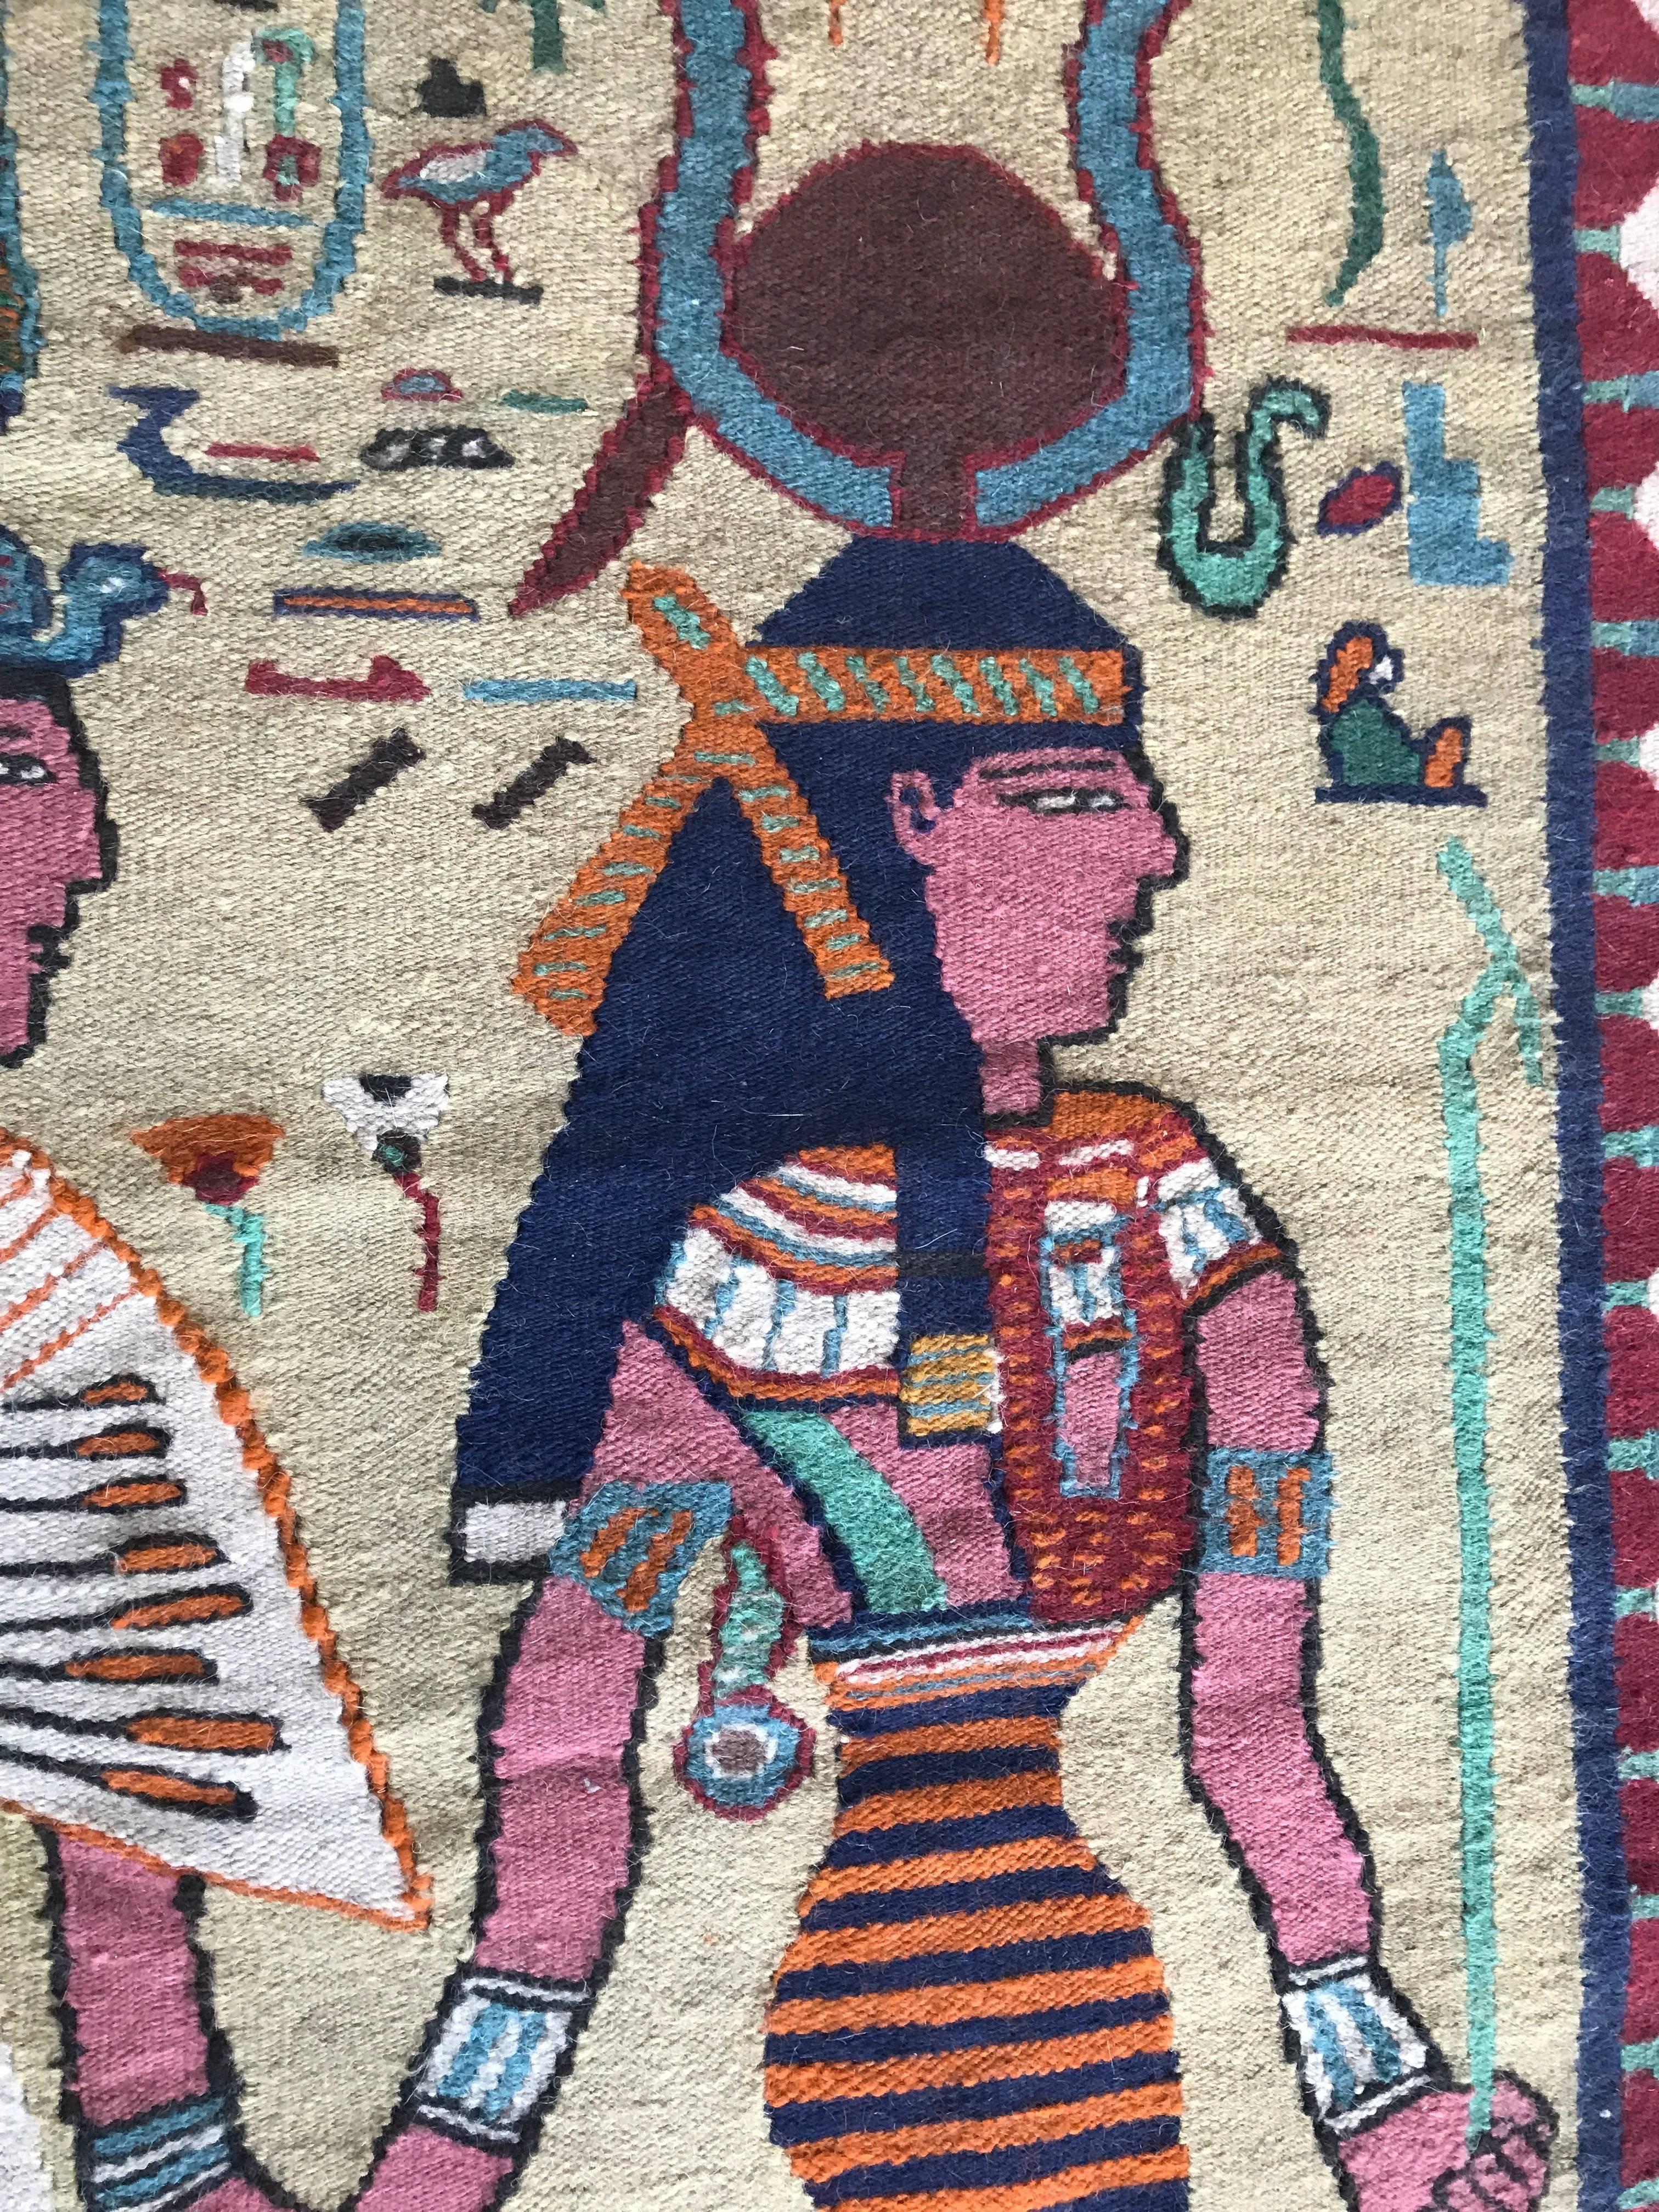 Early 20th Century Egyptian Revival Hand-Knotted Carpet / Tapestry Isis & Hathor 1